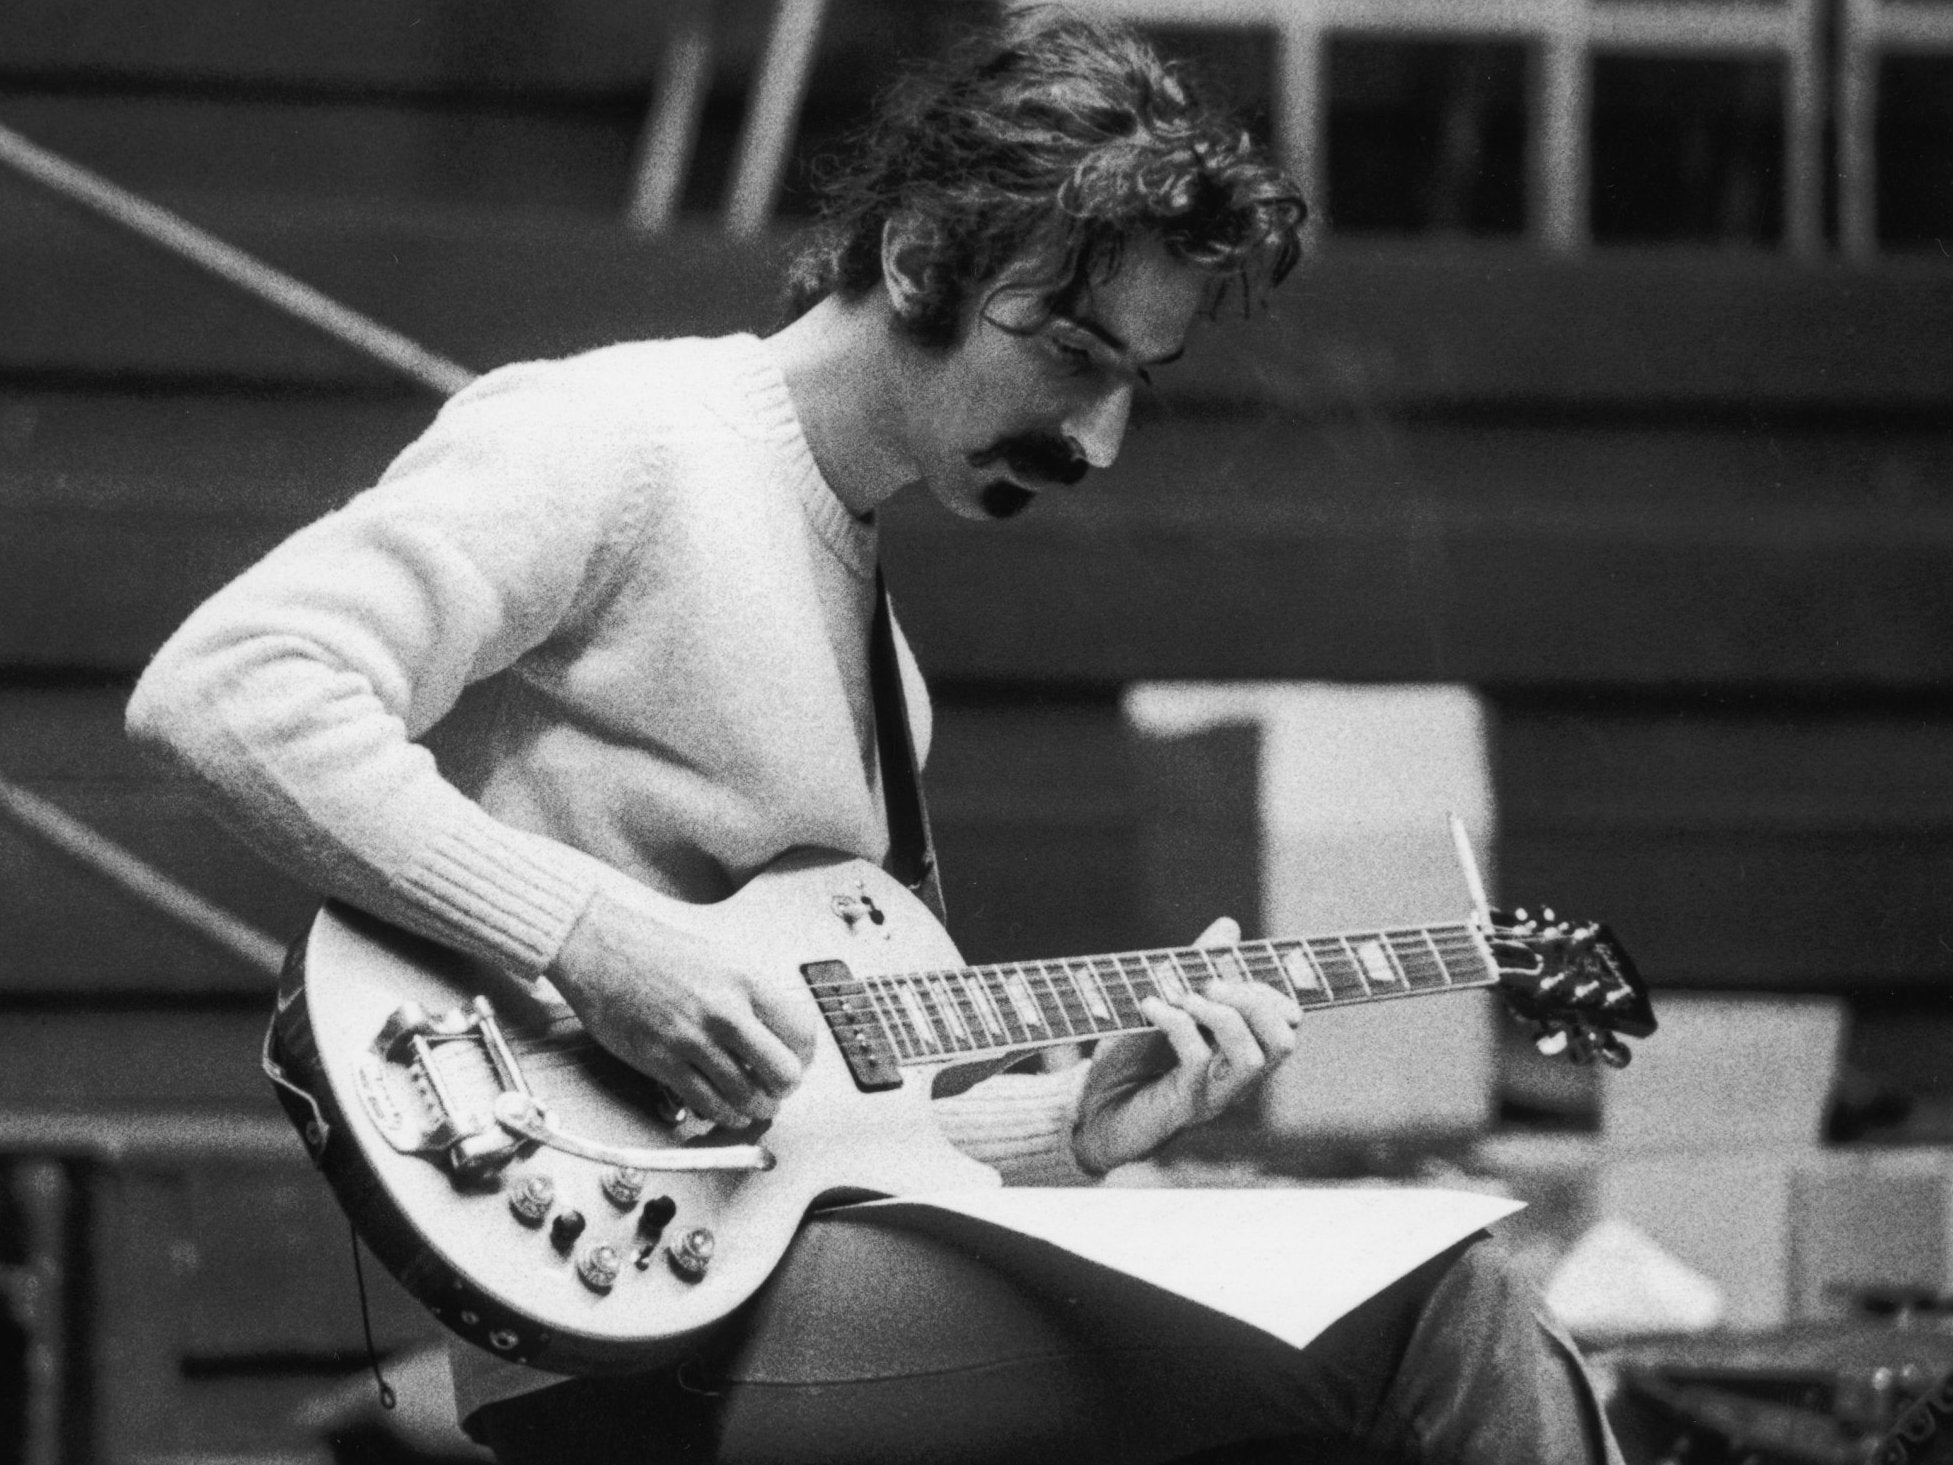 Zappa rehearsing for a concert at the Royal Albert Hall during his European tour in June 1969